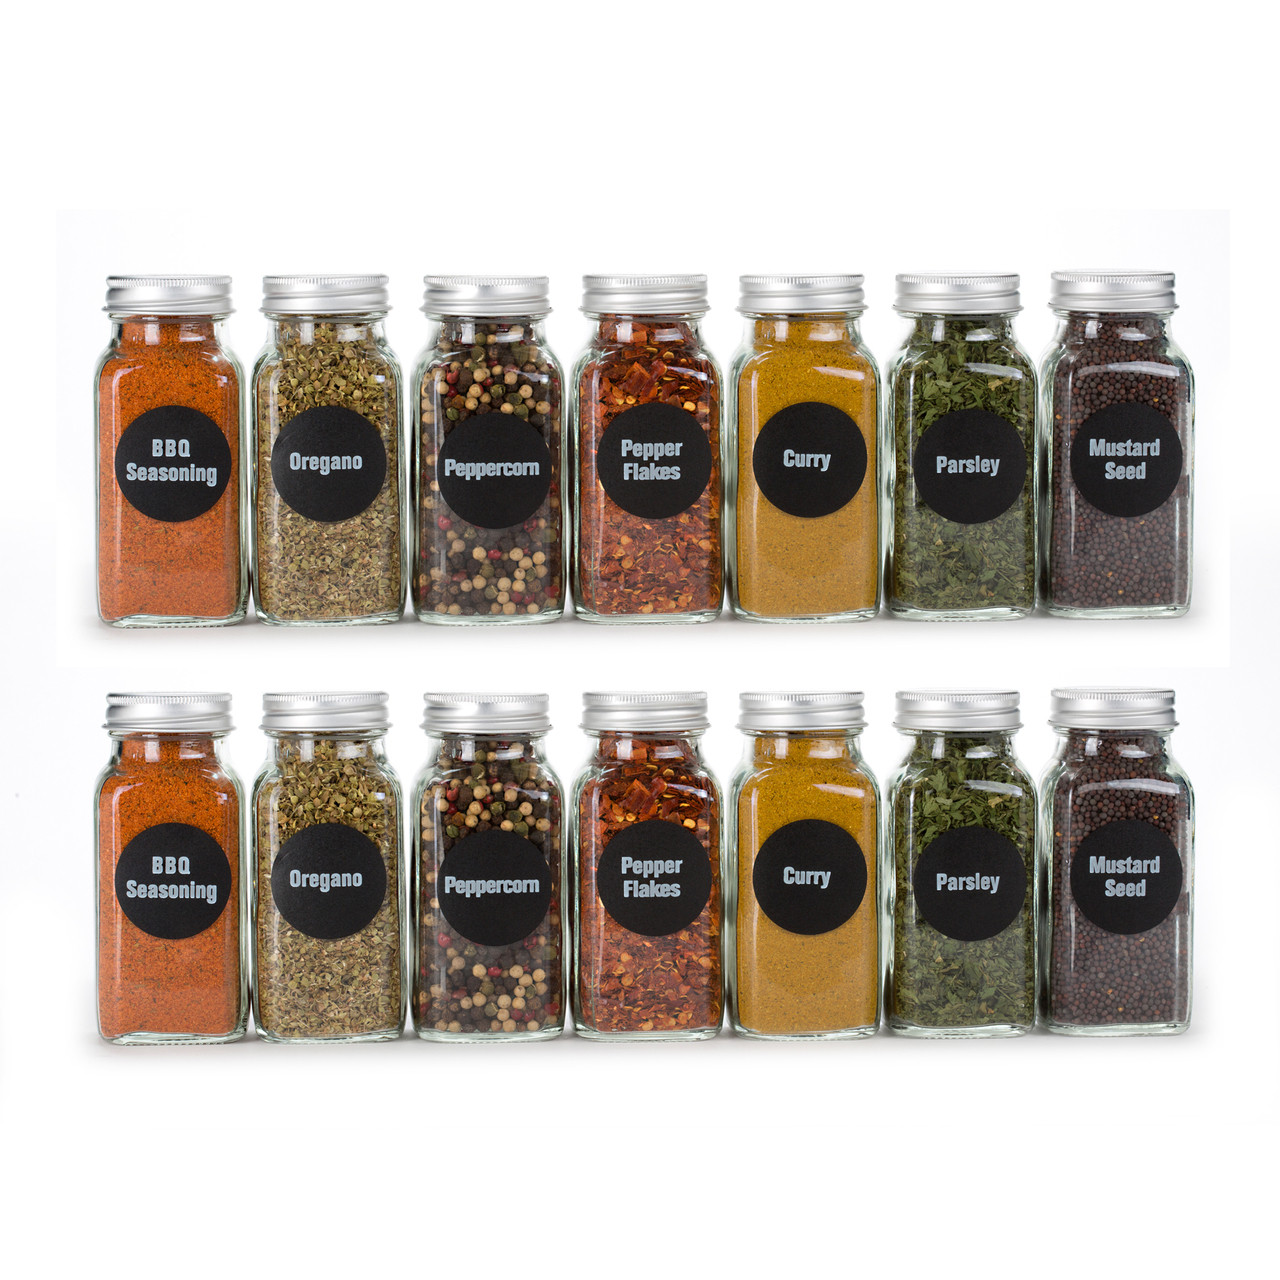 Premium Vials, 4oz, BEST VALUE 14 Glass Spice Jars includes pre-printed  Spice Labels. 14 Square Empty Jars, Airtight Cap, Chalkboard & Clear Label,  kitchen Funnel Pour/Sift Shakers